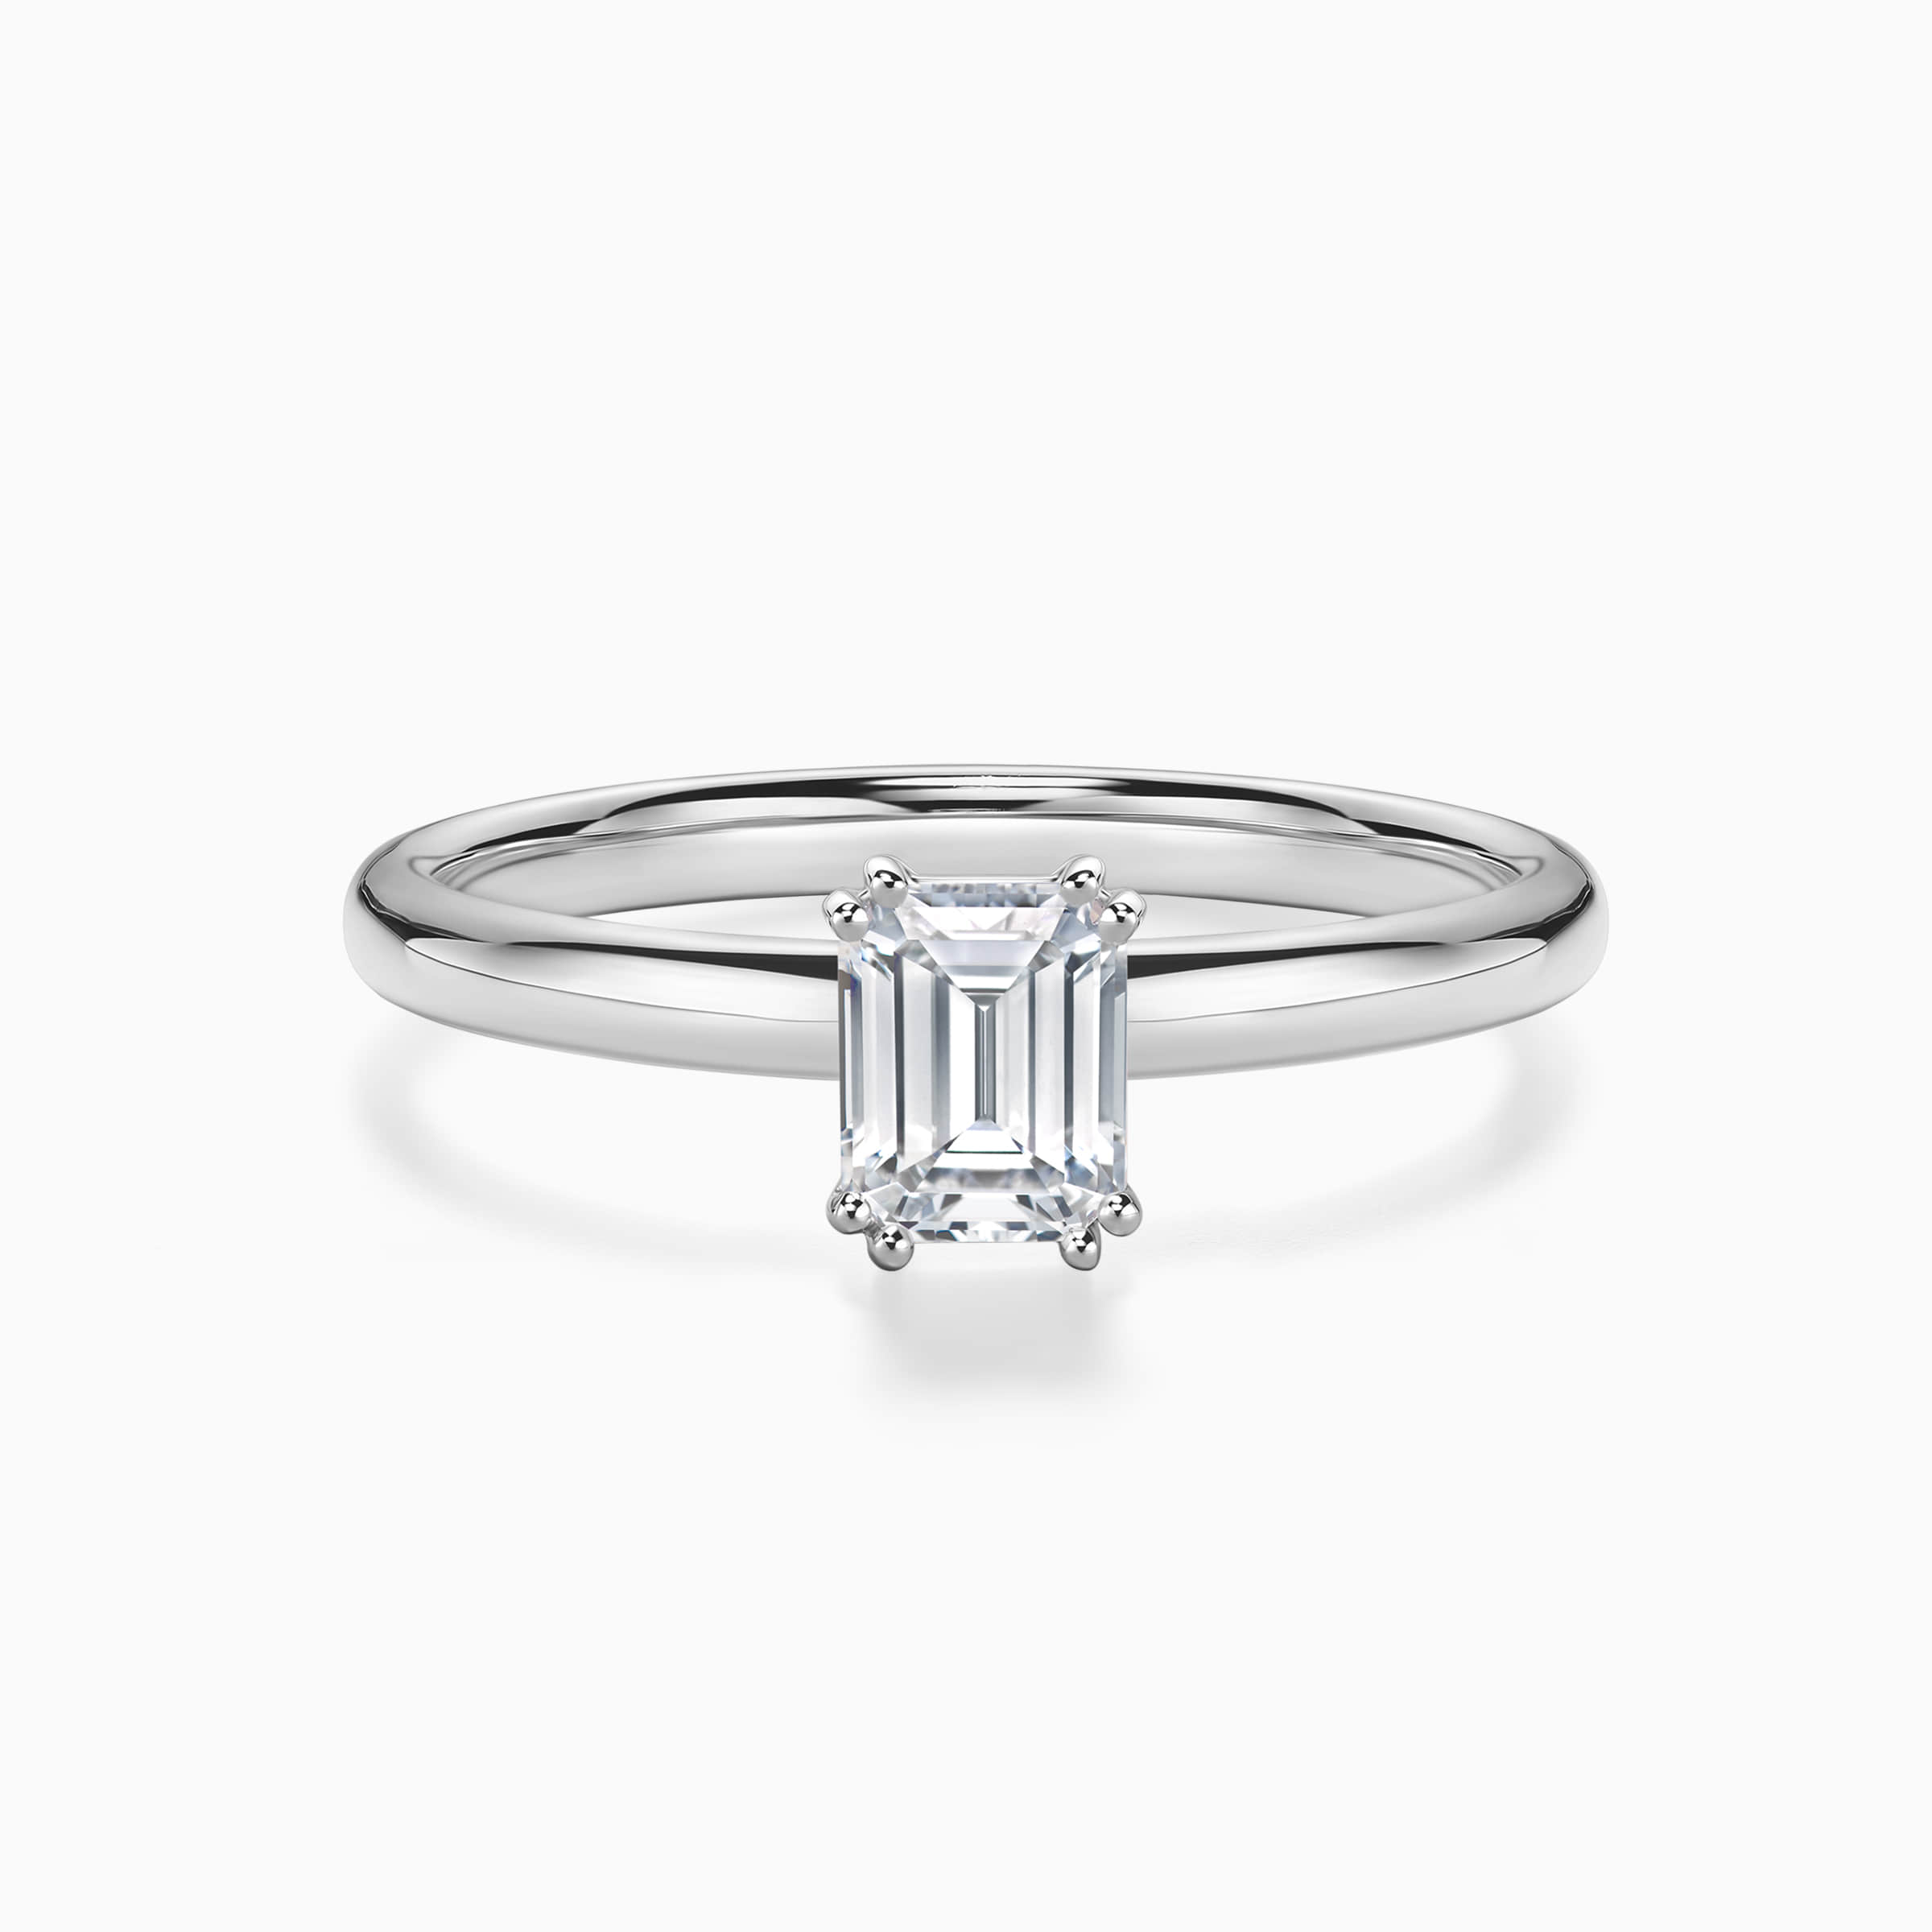 Darry Ring emerald cut diamond engagement ring white gold